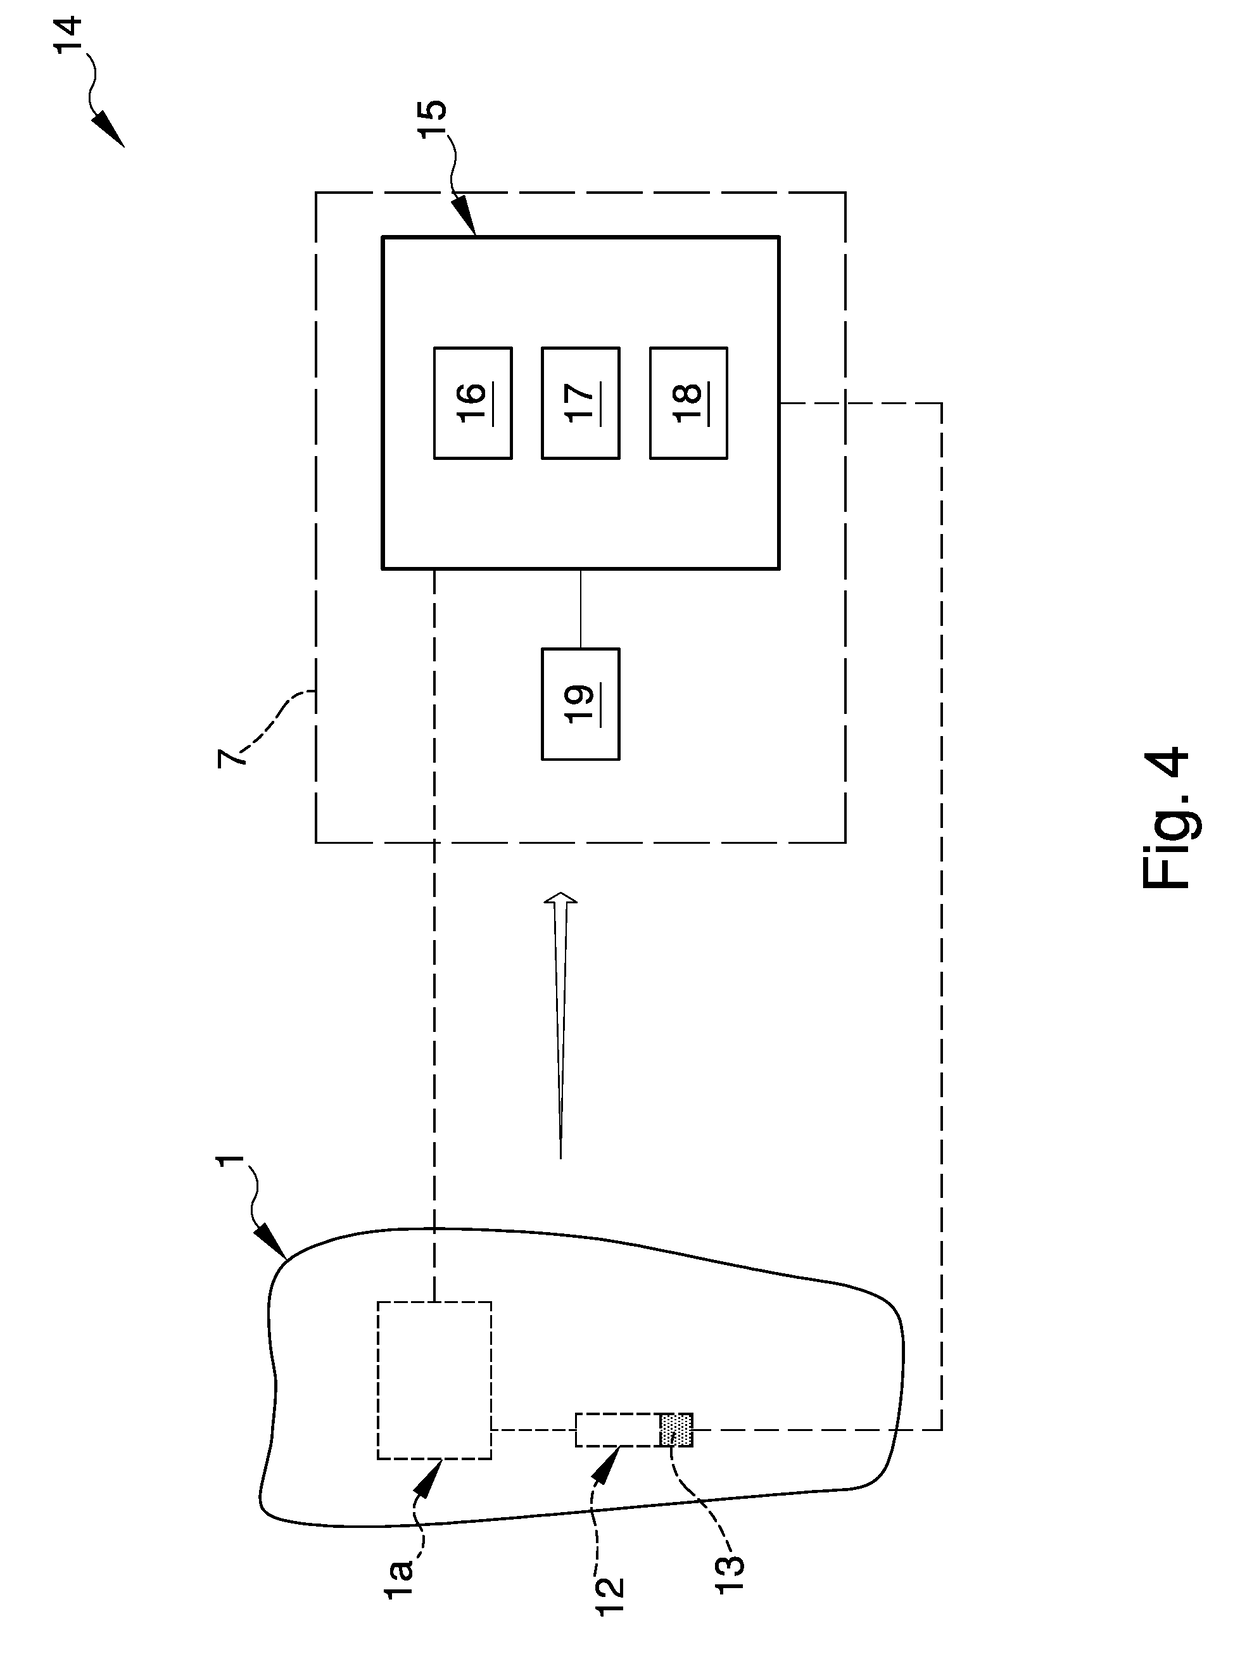 Protection device for carrying out sports activities usable in a data analysis and monitoring system, and relative system and method for processing and calculating the sent data